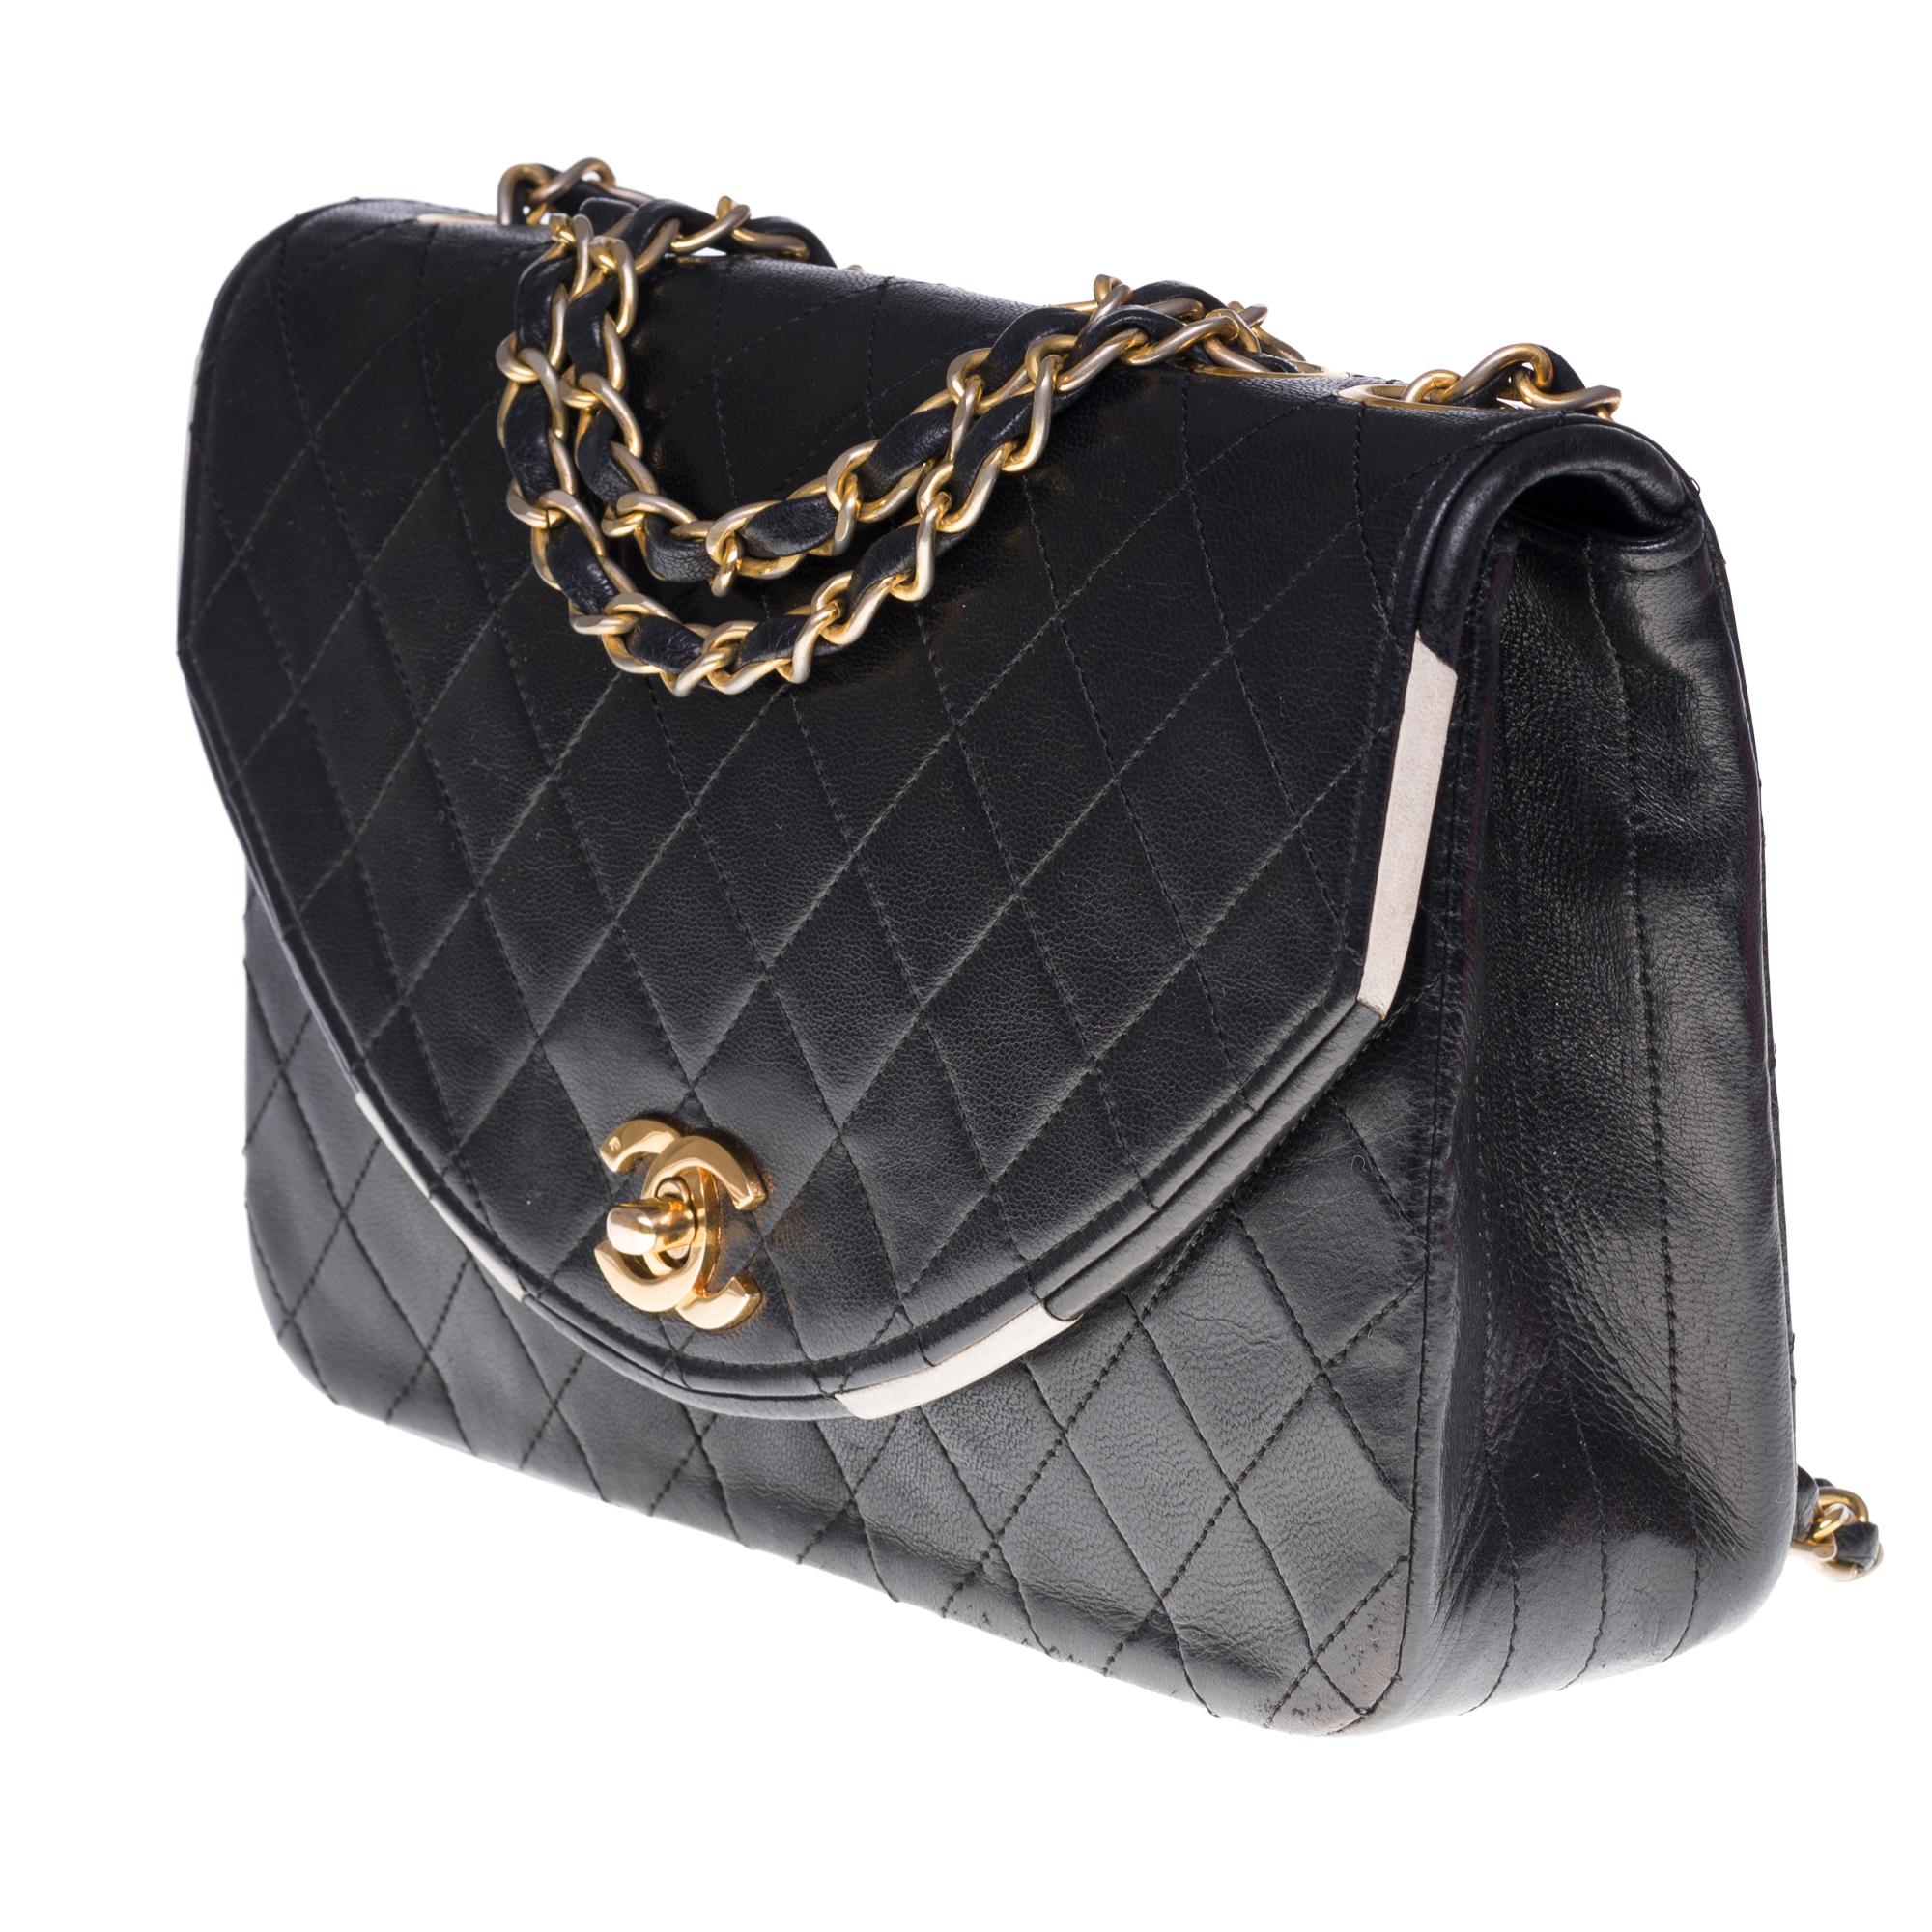 Black The Coveted Chanel Timeless 23cm Shoulder bag in black quilted lambskin and GHW